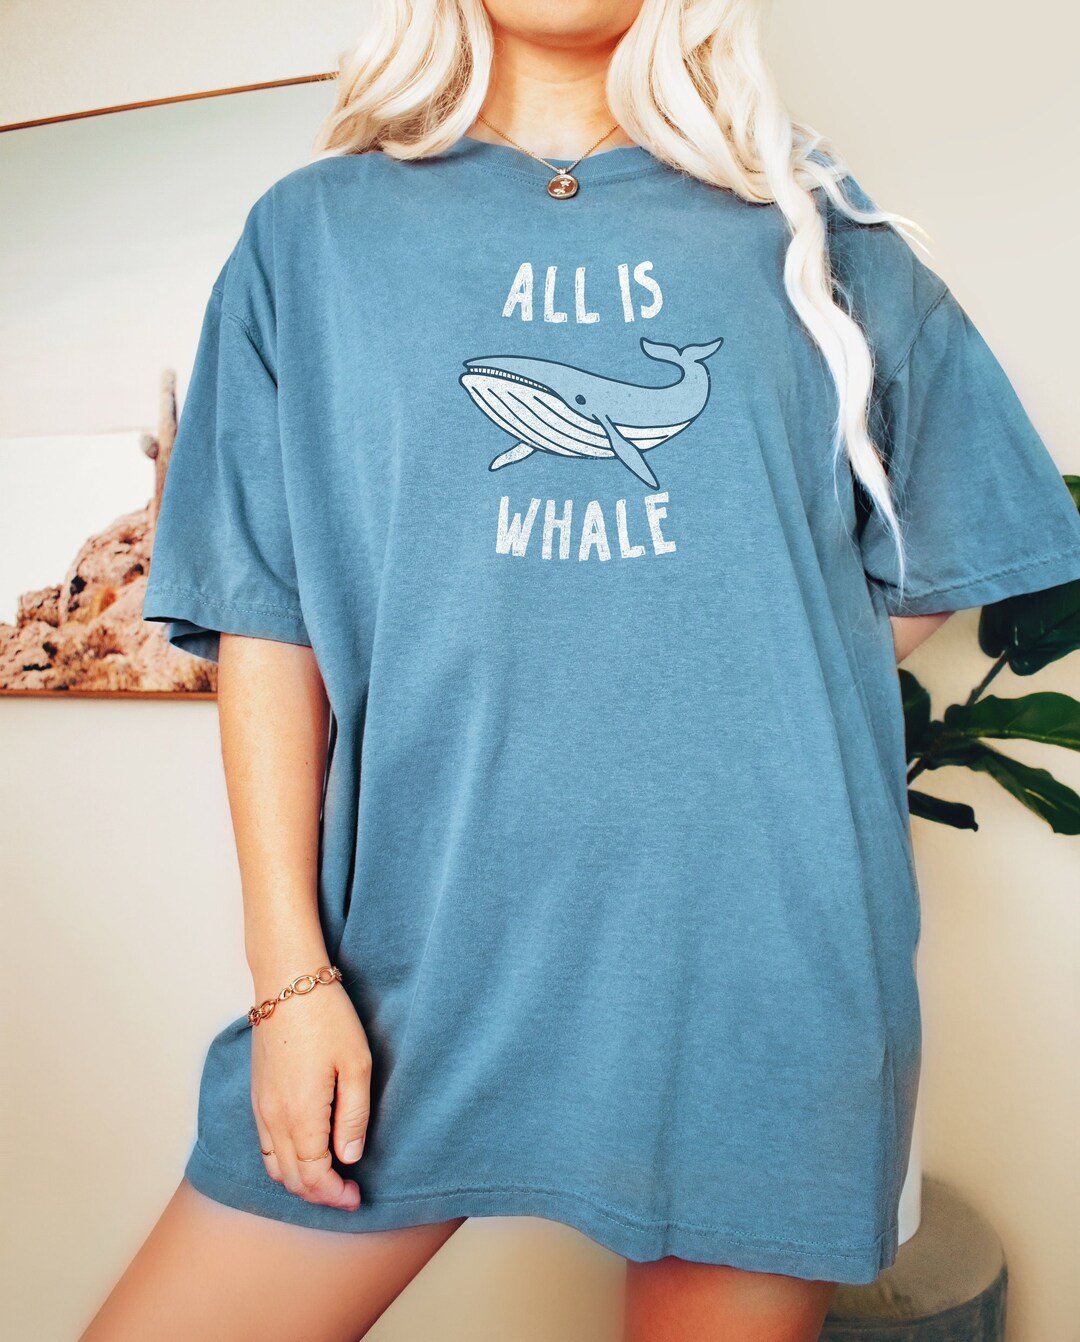 Whale Tshirt Funny Whale Gifts All is Whale T-shirt Ocean - Etsy